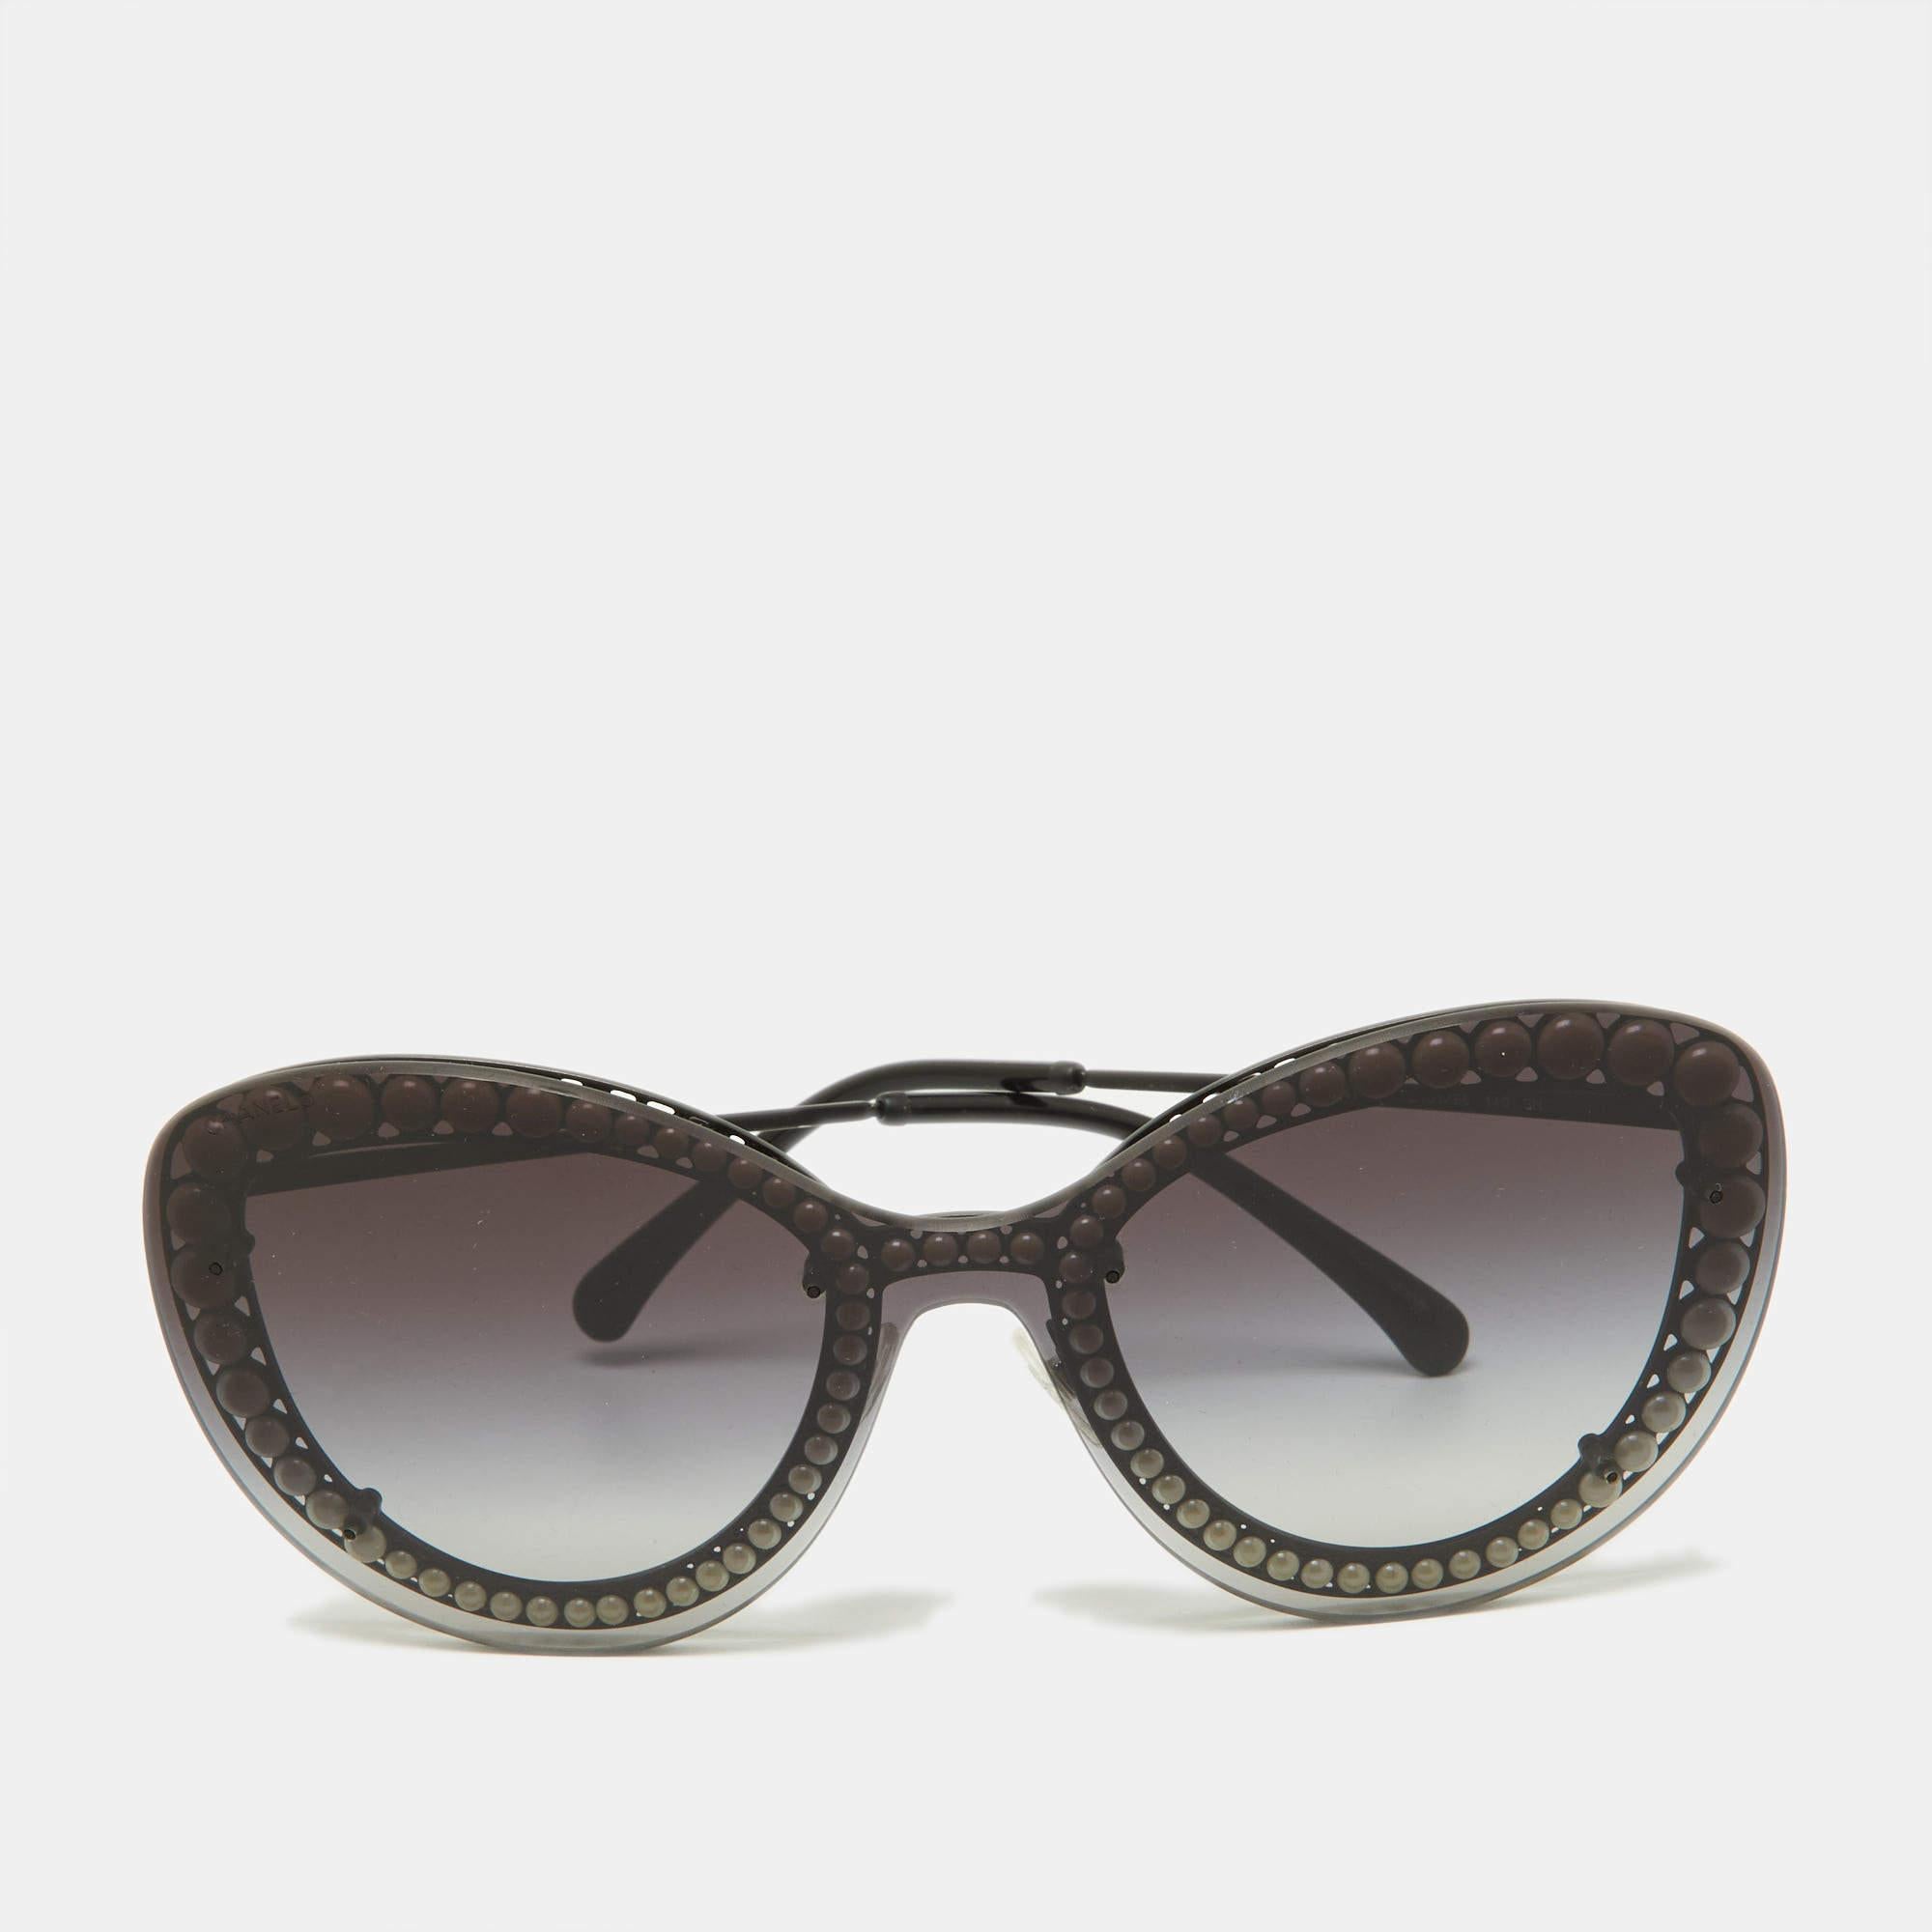 Elevate your eyewear game with these Chanel sunglasses for women. Meticulously crafted from premium materials, they offer unparalleled protection and a timeless design, making them a must-have accessory for the fashion-forward.

